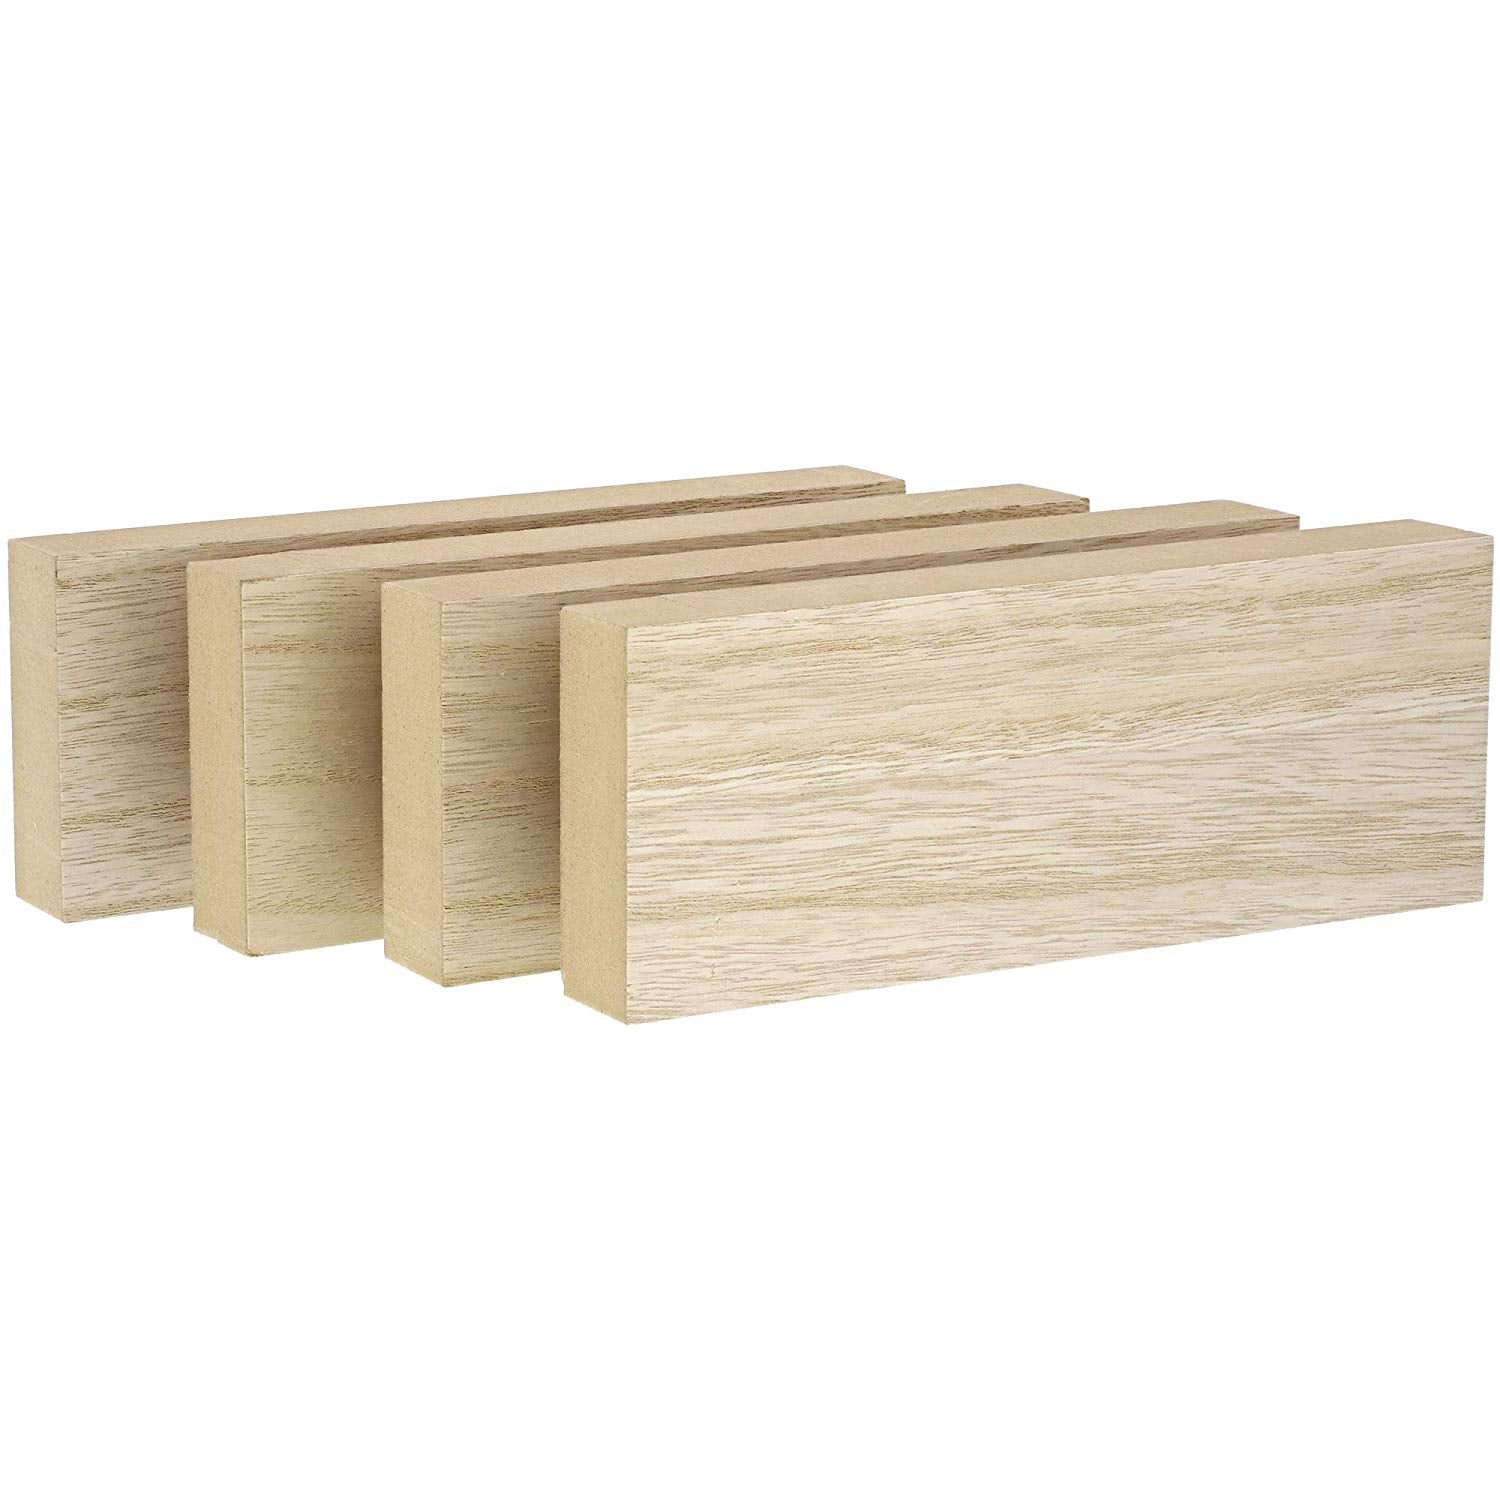 4 Pack Unfinished Wood Blocks Pieces for Arts and Crafts, 1 Inch Thick, 4  Sizes